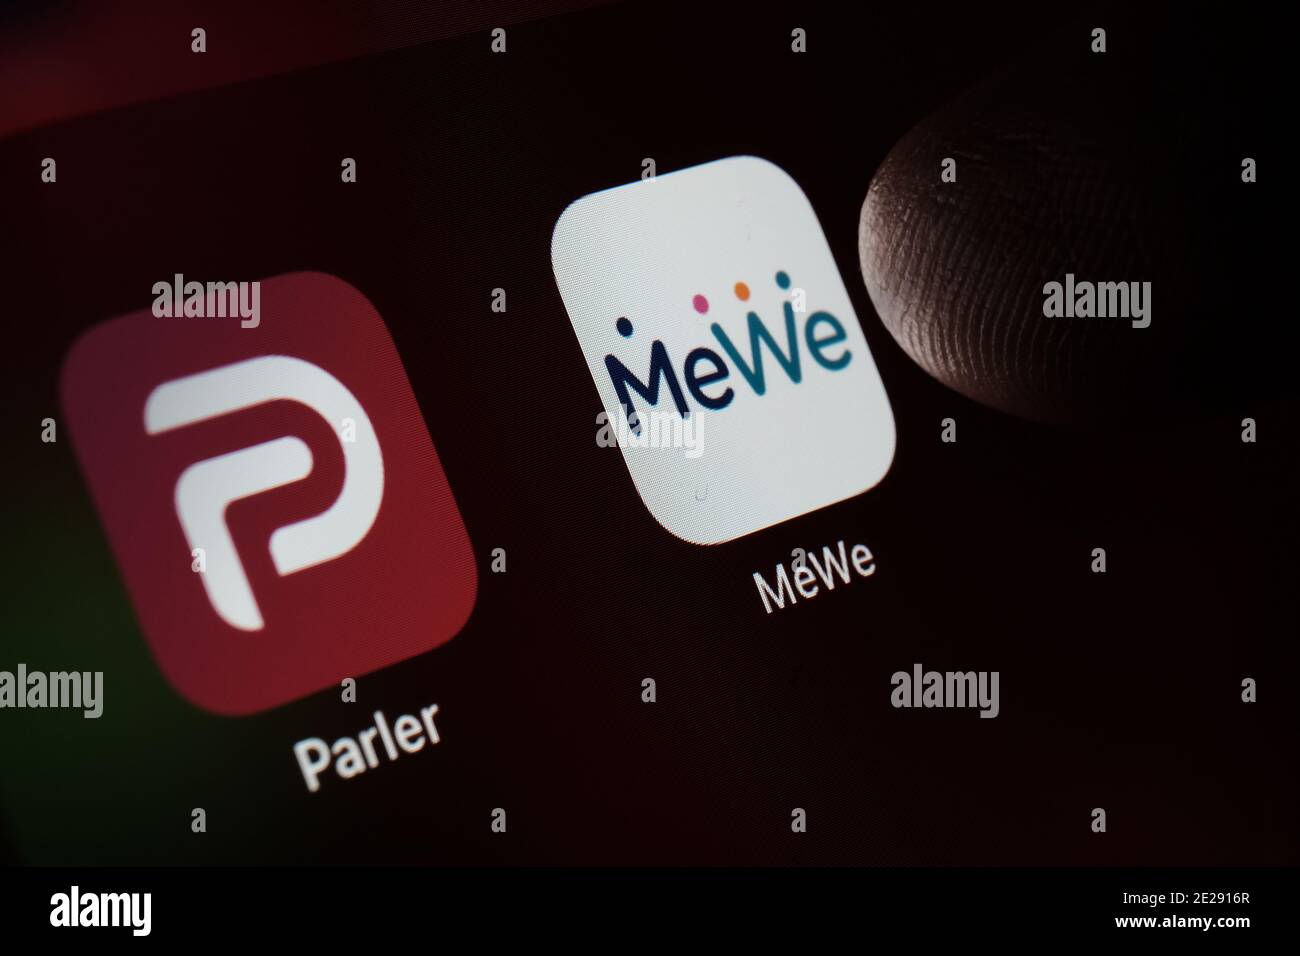 Stafford, UK - January 12 2021: Parler and MeWe apps and blurred finger above them. New social network apps popular in the United States. Concept. Stock Photo